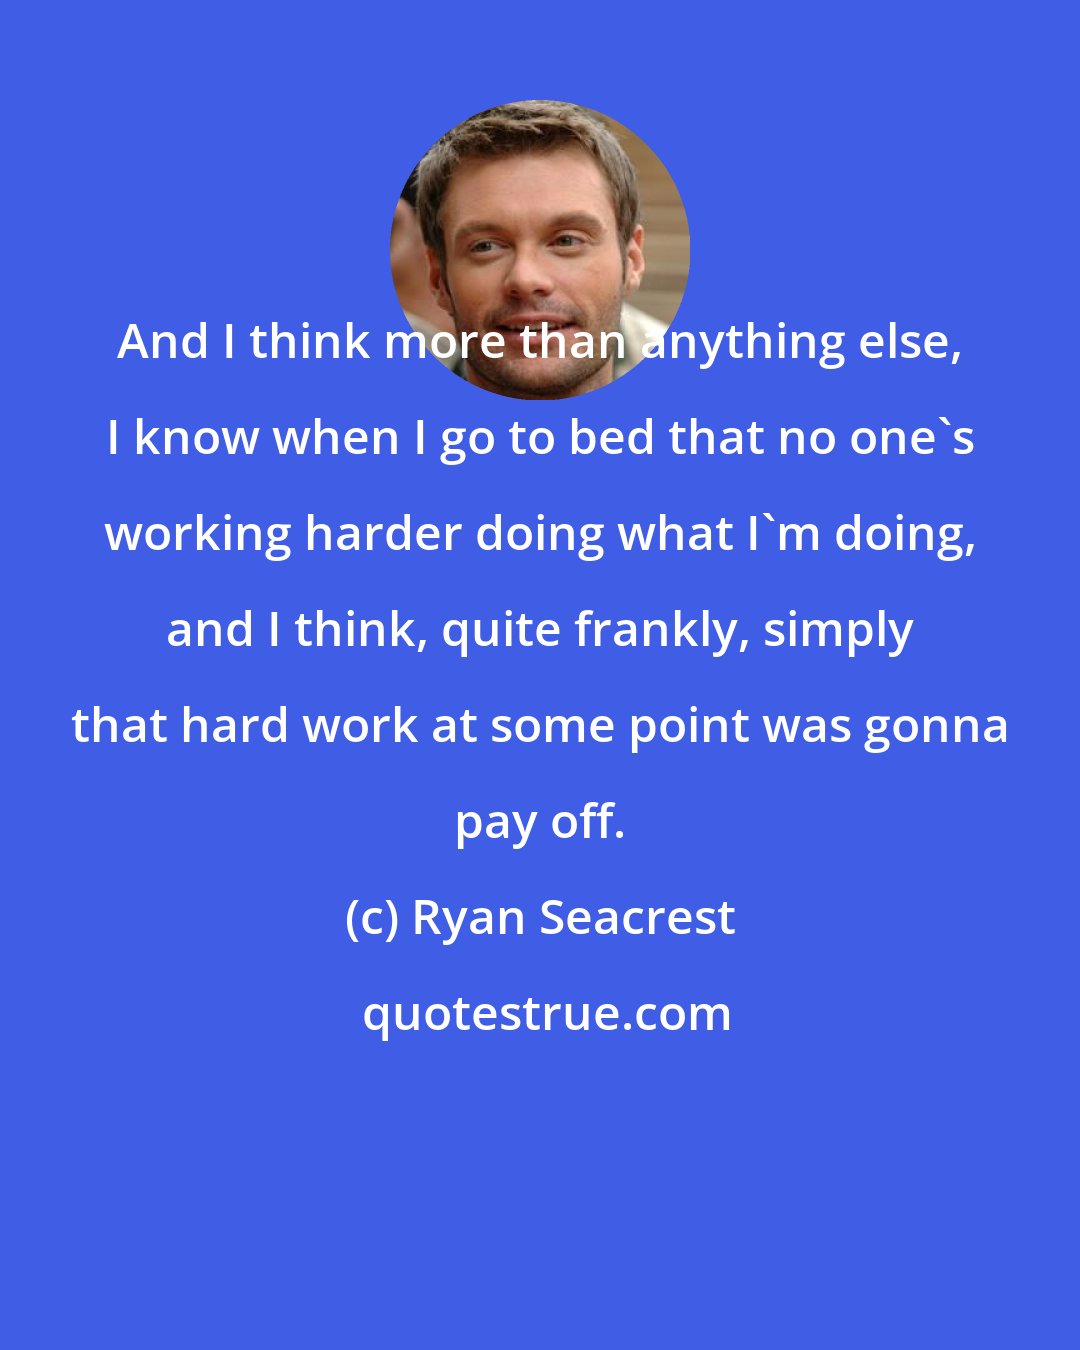 Ryan Seacrest: And I think more than anything else, I know when I go to bed that no one's working harder doing what I'm doing, and I think, quite frankly, simply that hard work at some point was gonna pay off.